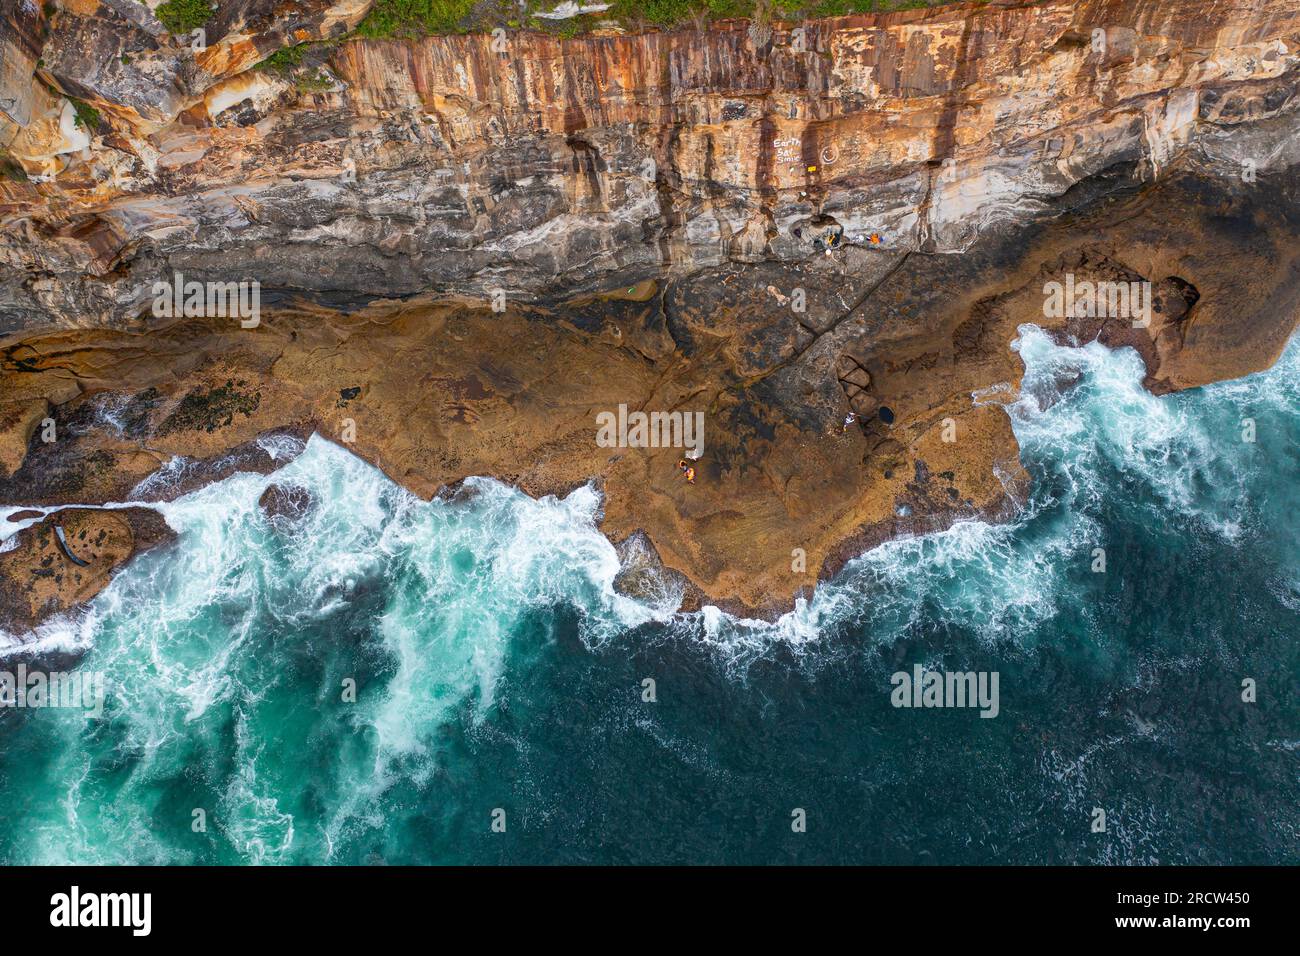 Aerial drone view of people fishing using a fishing rods while standing on rocks, Sudney NSW Australia Stock Photo